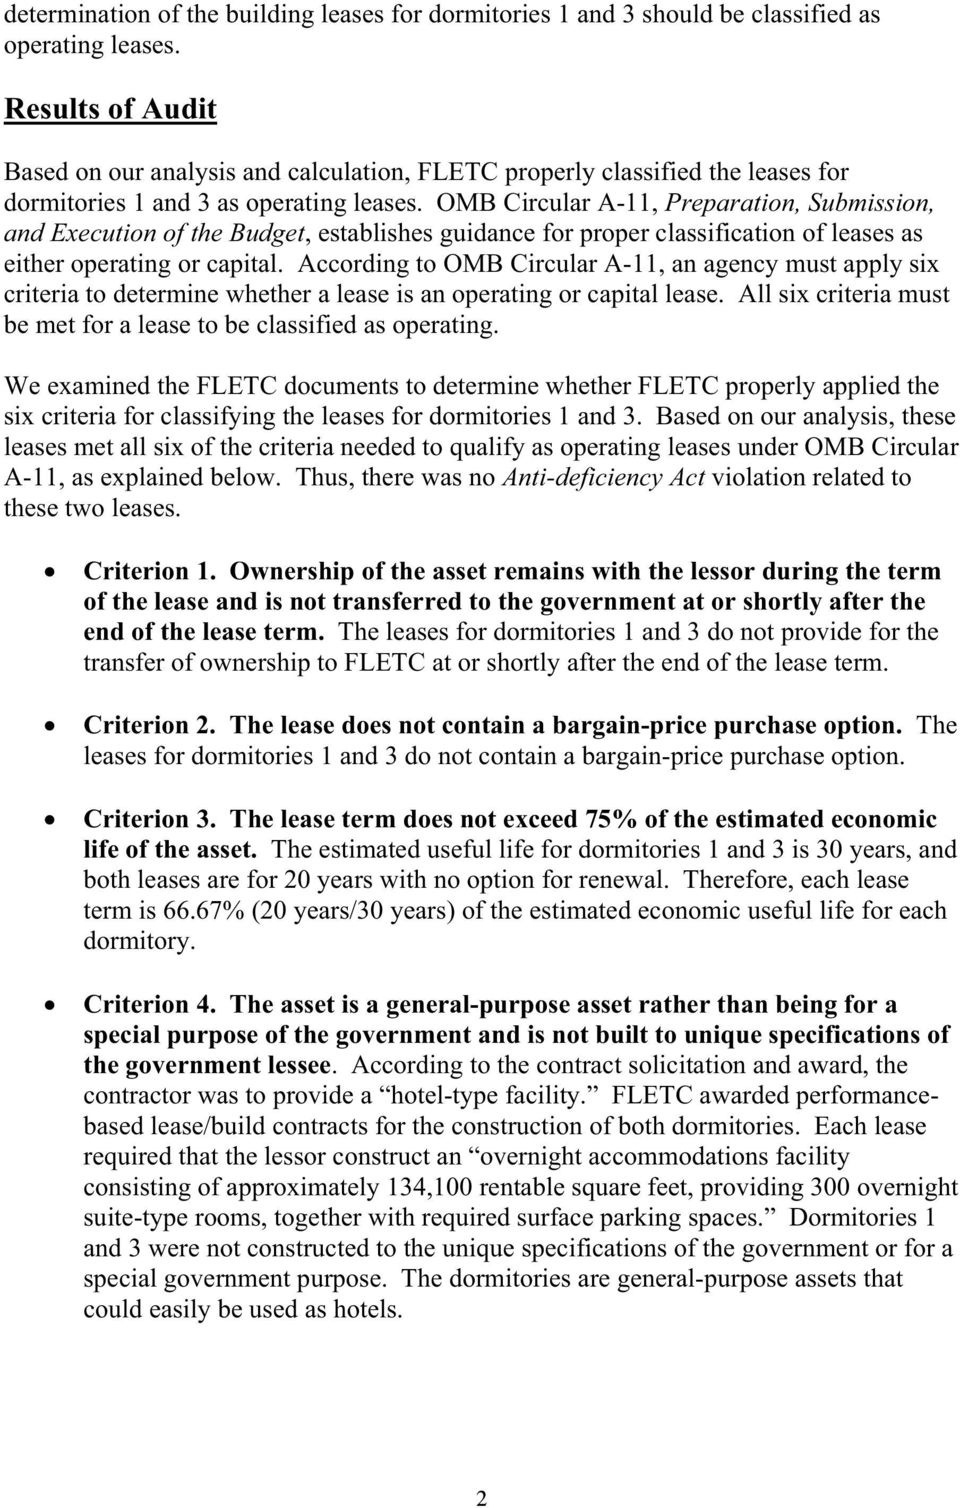 OMB Circular A-11, Preparation, Submission, and Execution of the Budget, establishes guidance for proper classification of leases as either operating or capital.